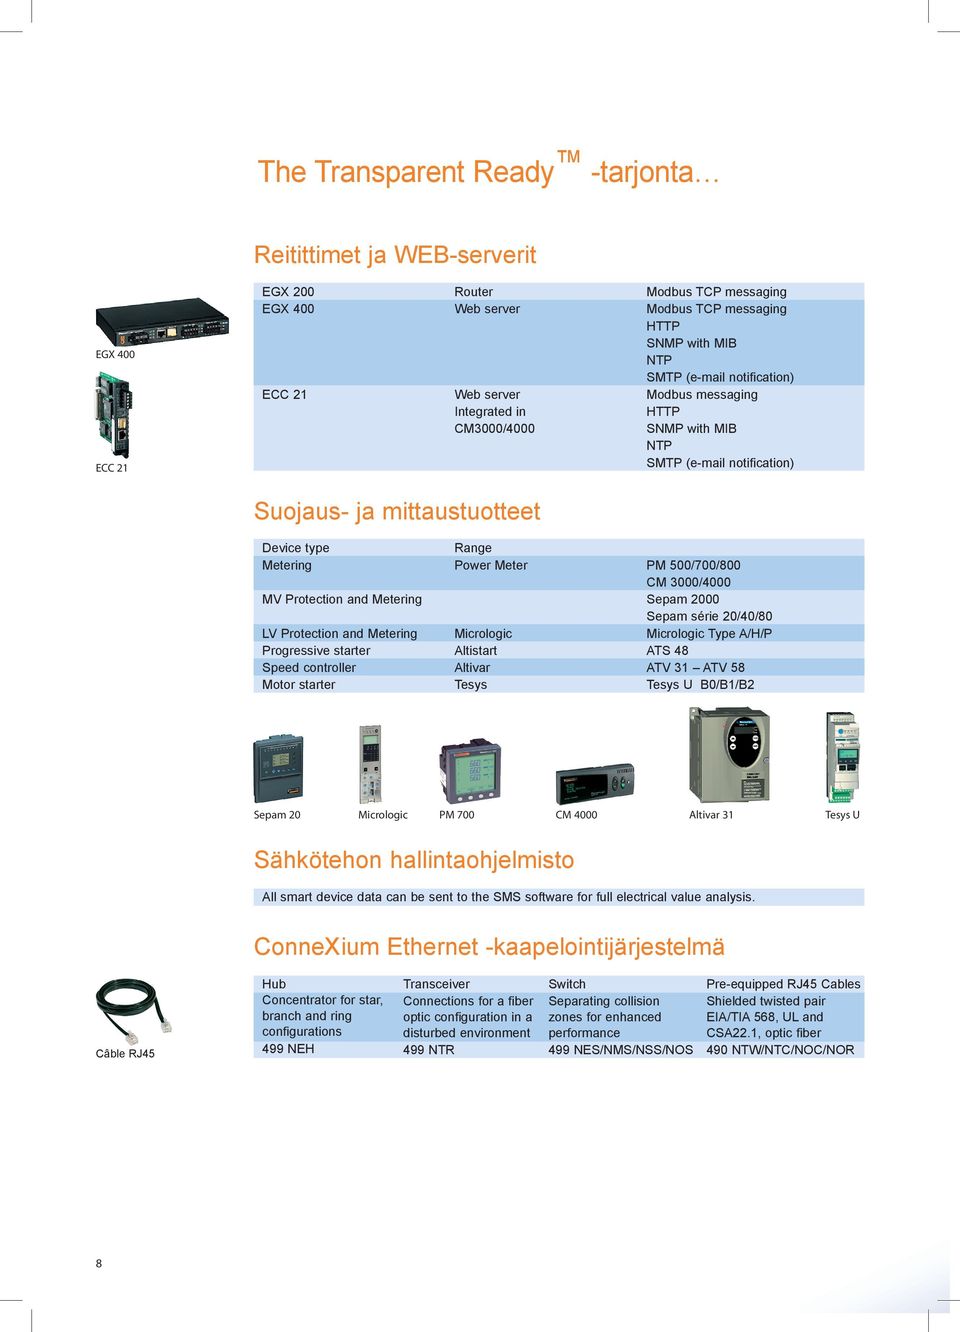 500/700/800 CM 3000/4000 MV Protection and Metering Sepam 2000 Sepam série 20/40/80 LV Protection and Metering Micrologic Micrologic Type A/H/P Progressive starter Altistart ATS 48 Speed controller